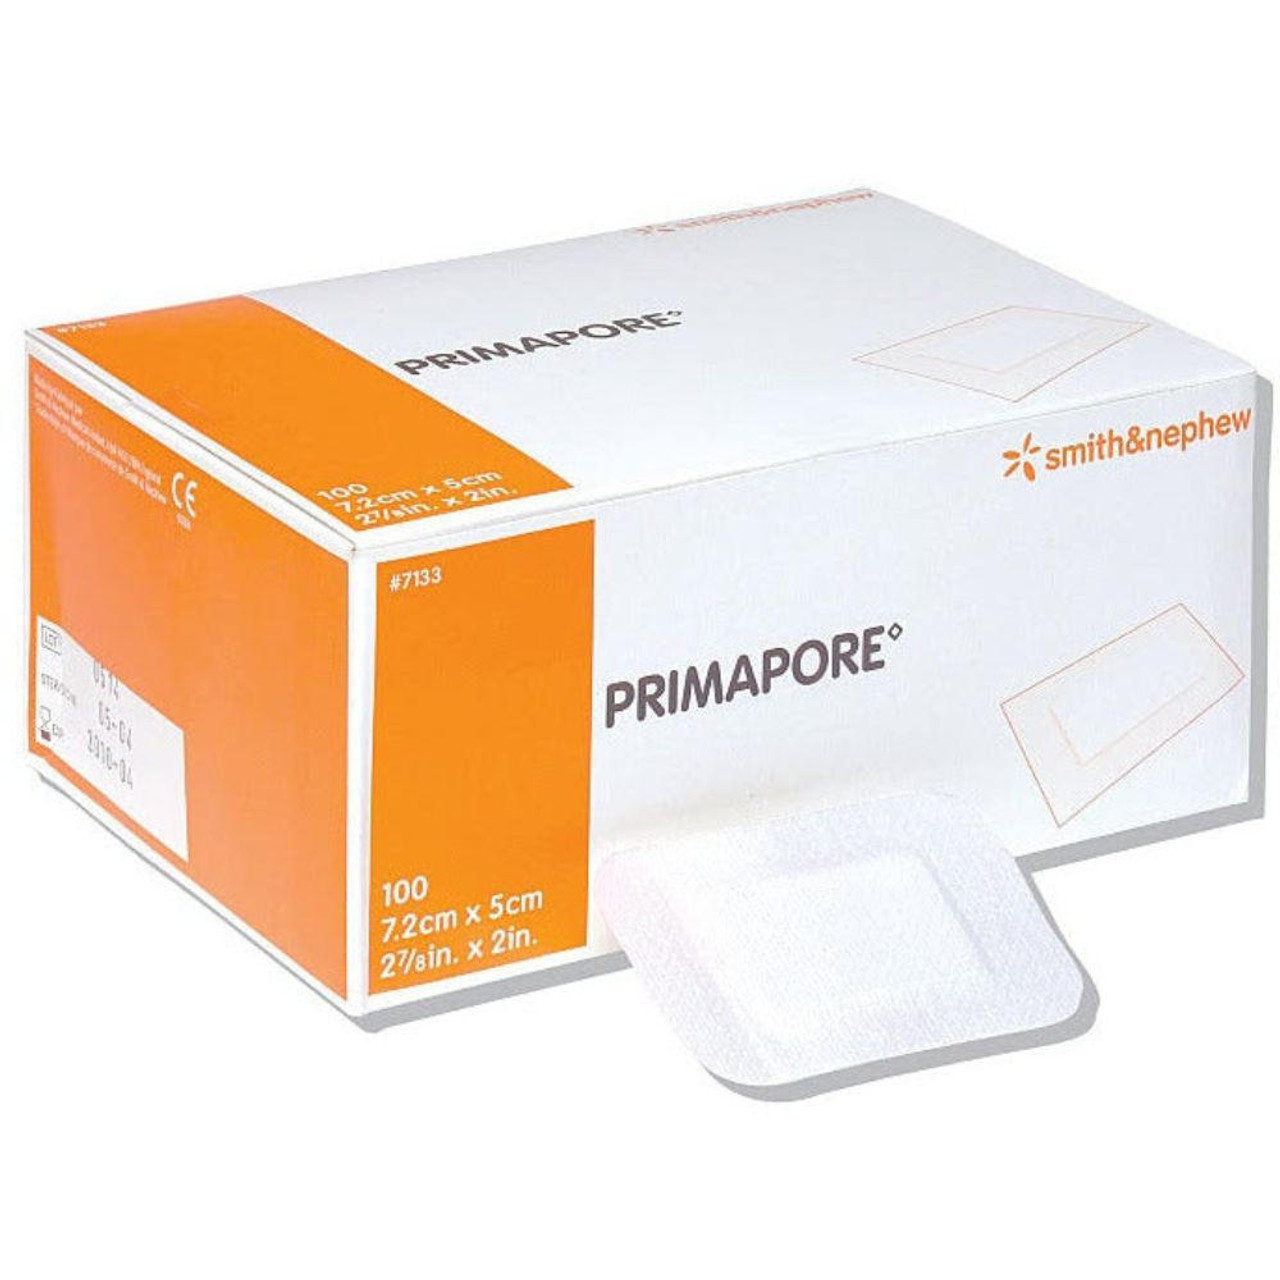 FDR-7135 Primapore Absorbent Dressing With Adhesive Border 8.3x6cm Box of 50   